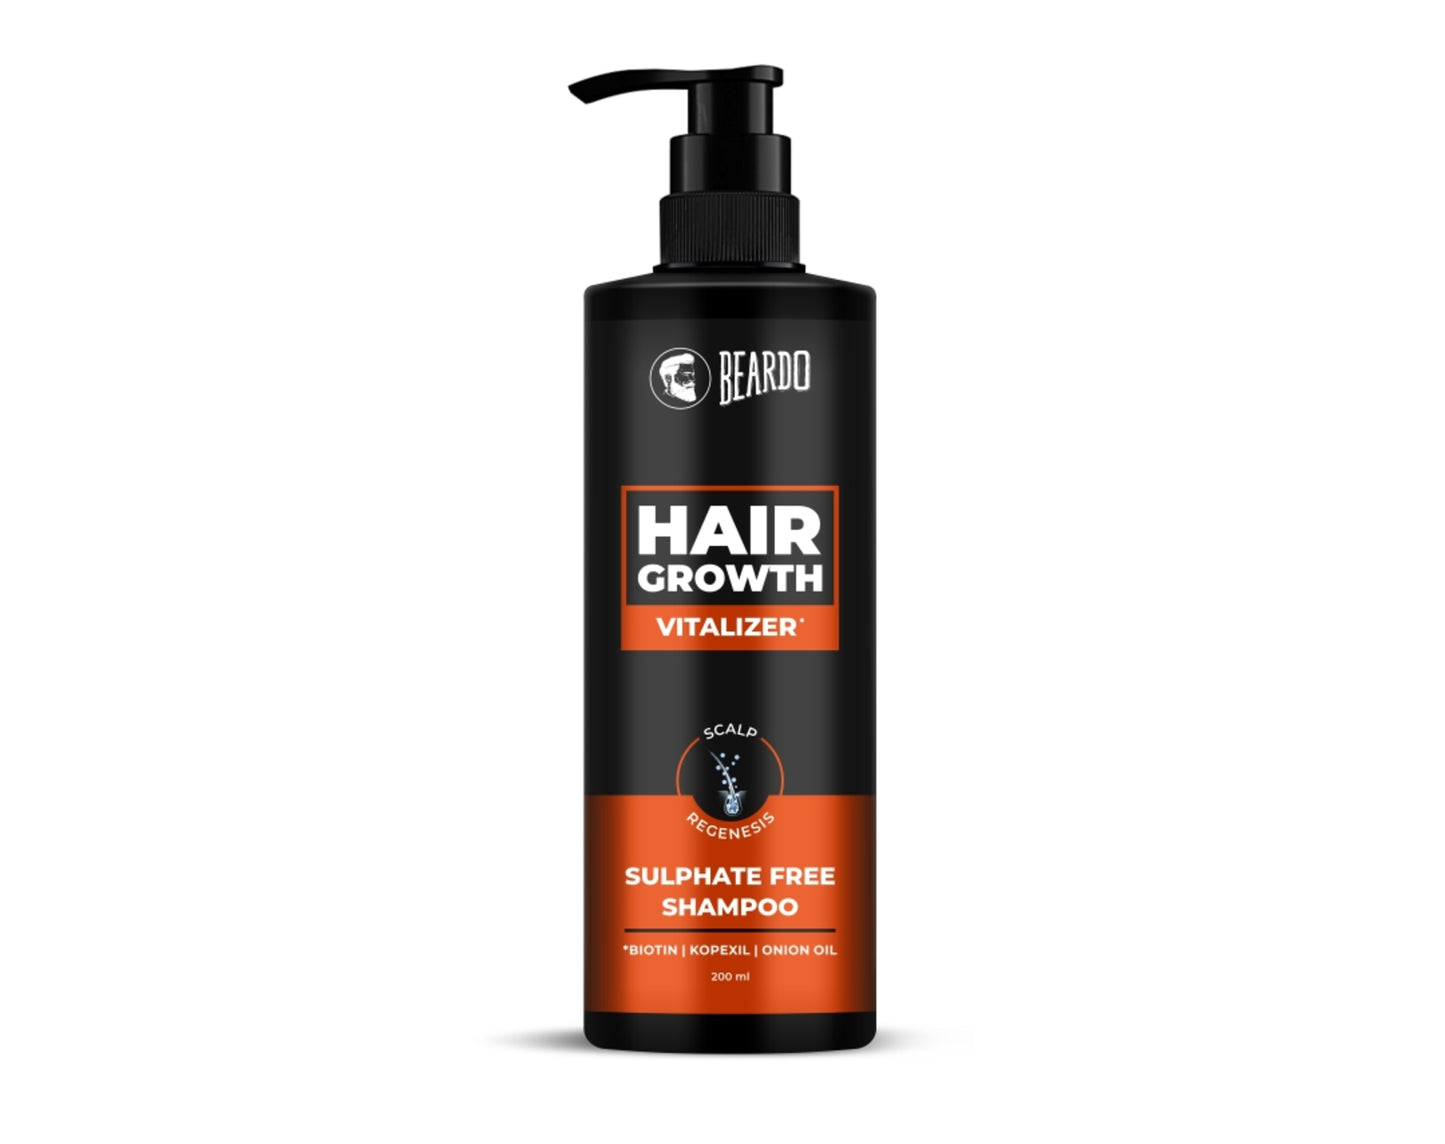 sulphate free shampoo for men, hair growth vitalizer, sulphate free shampoo